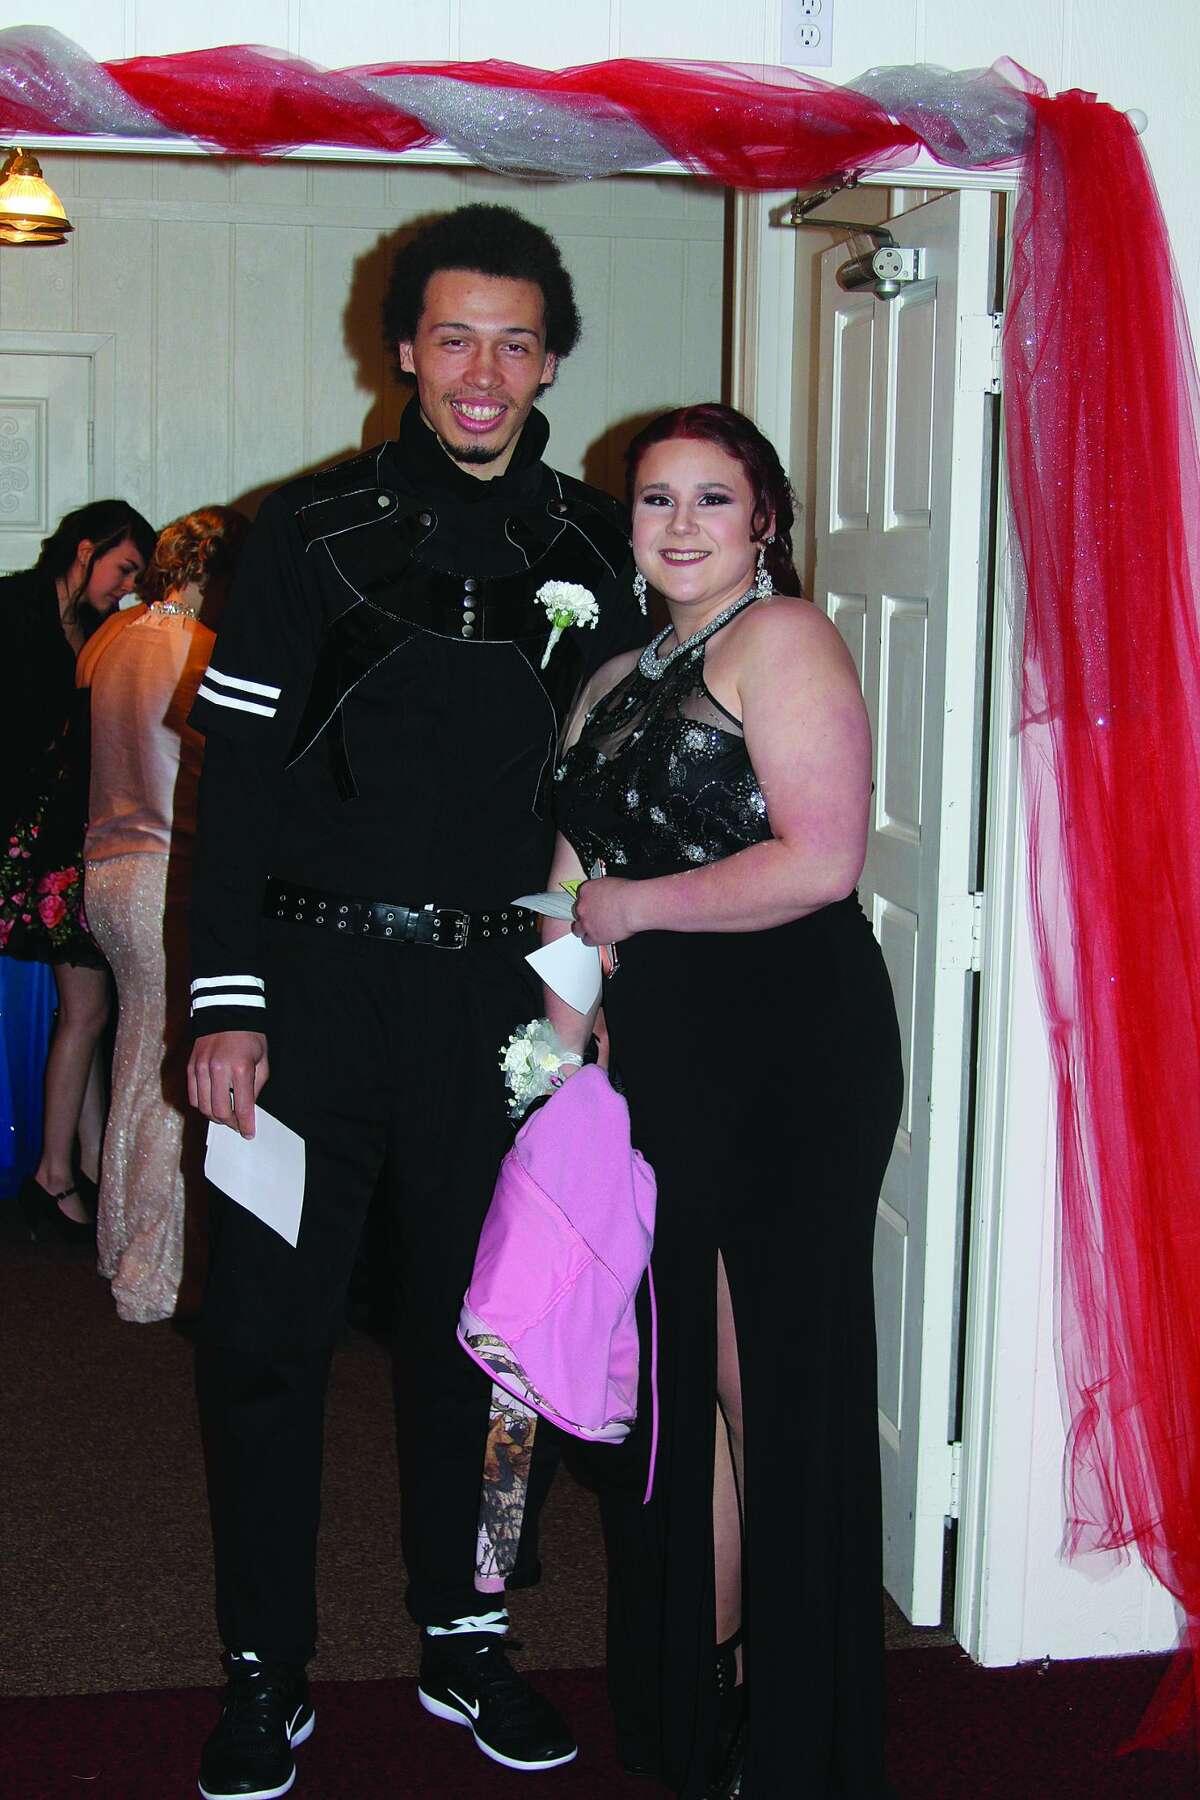 The 2017 Cass City Prom was held Saturday at Ubly Heights.